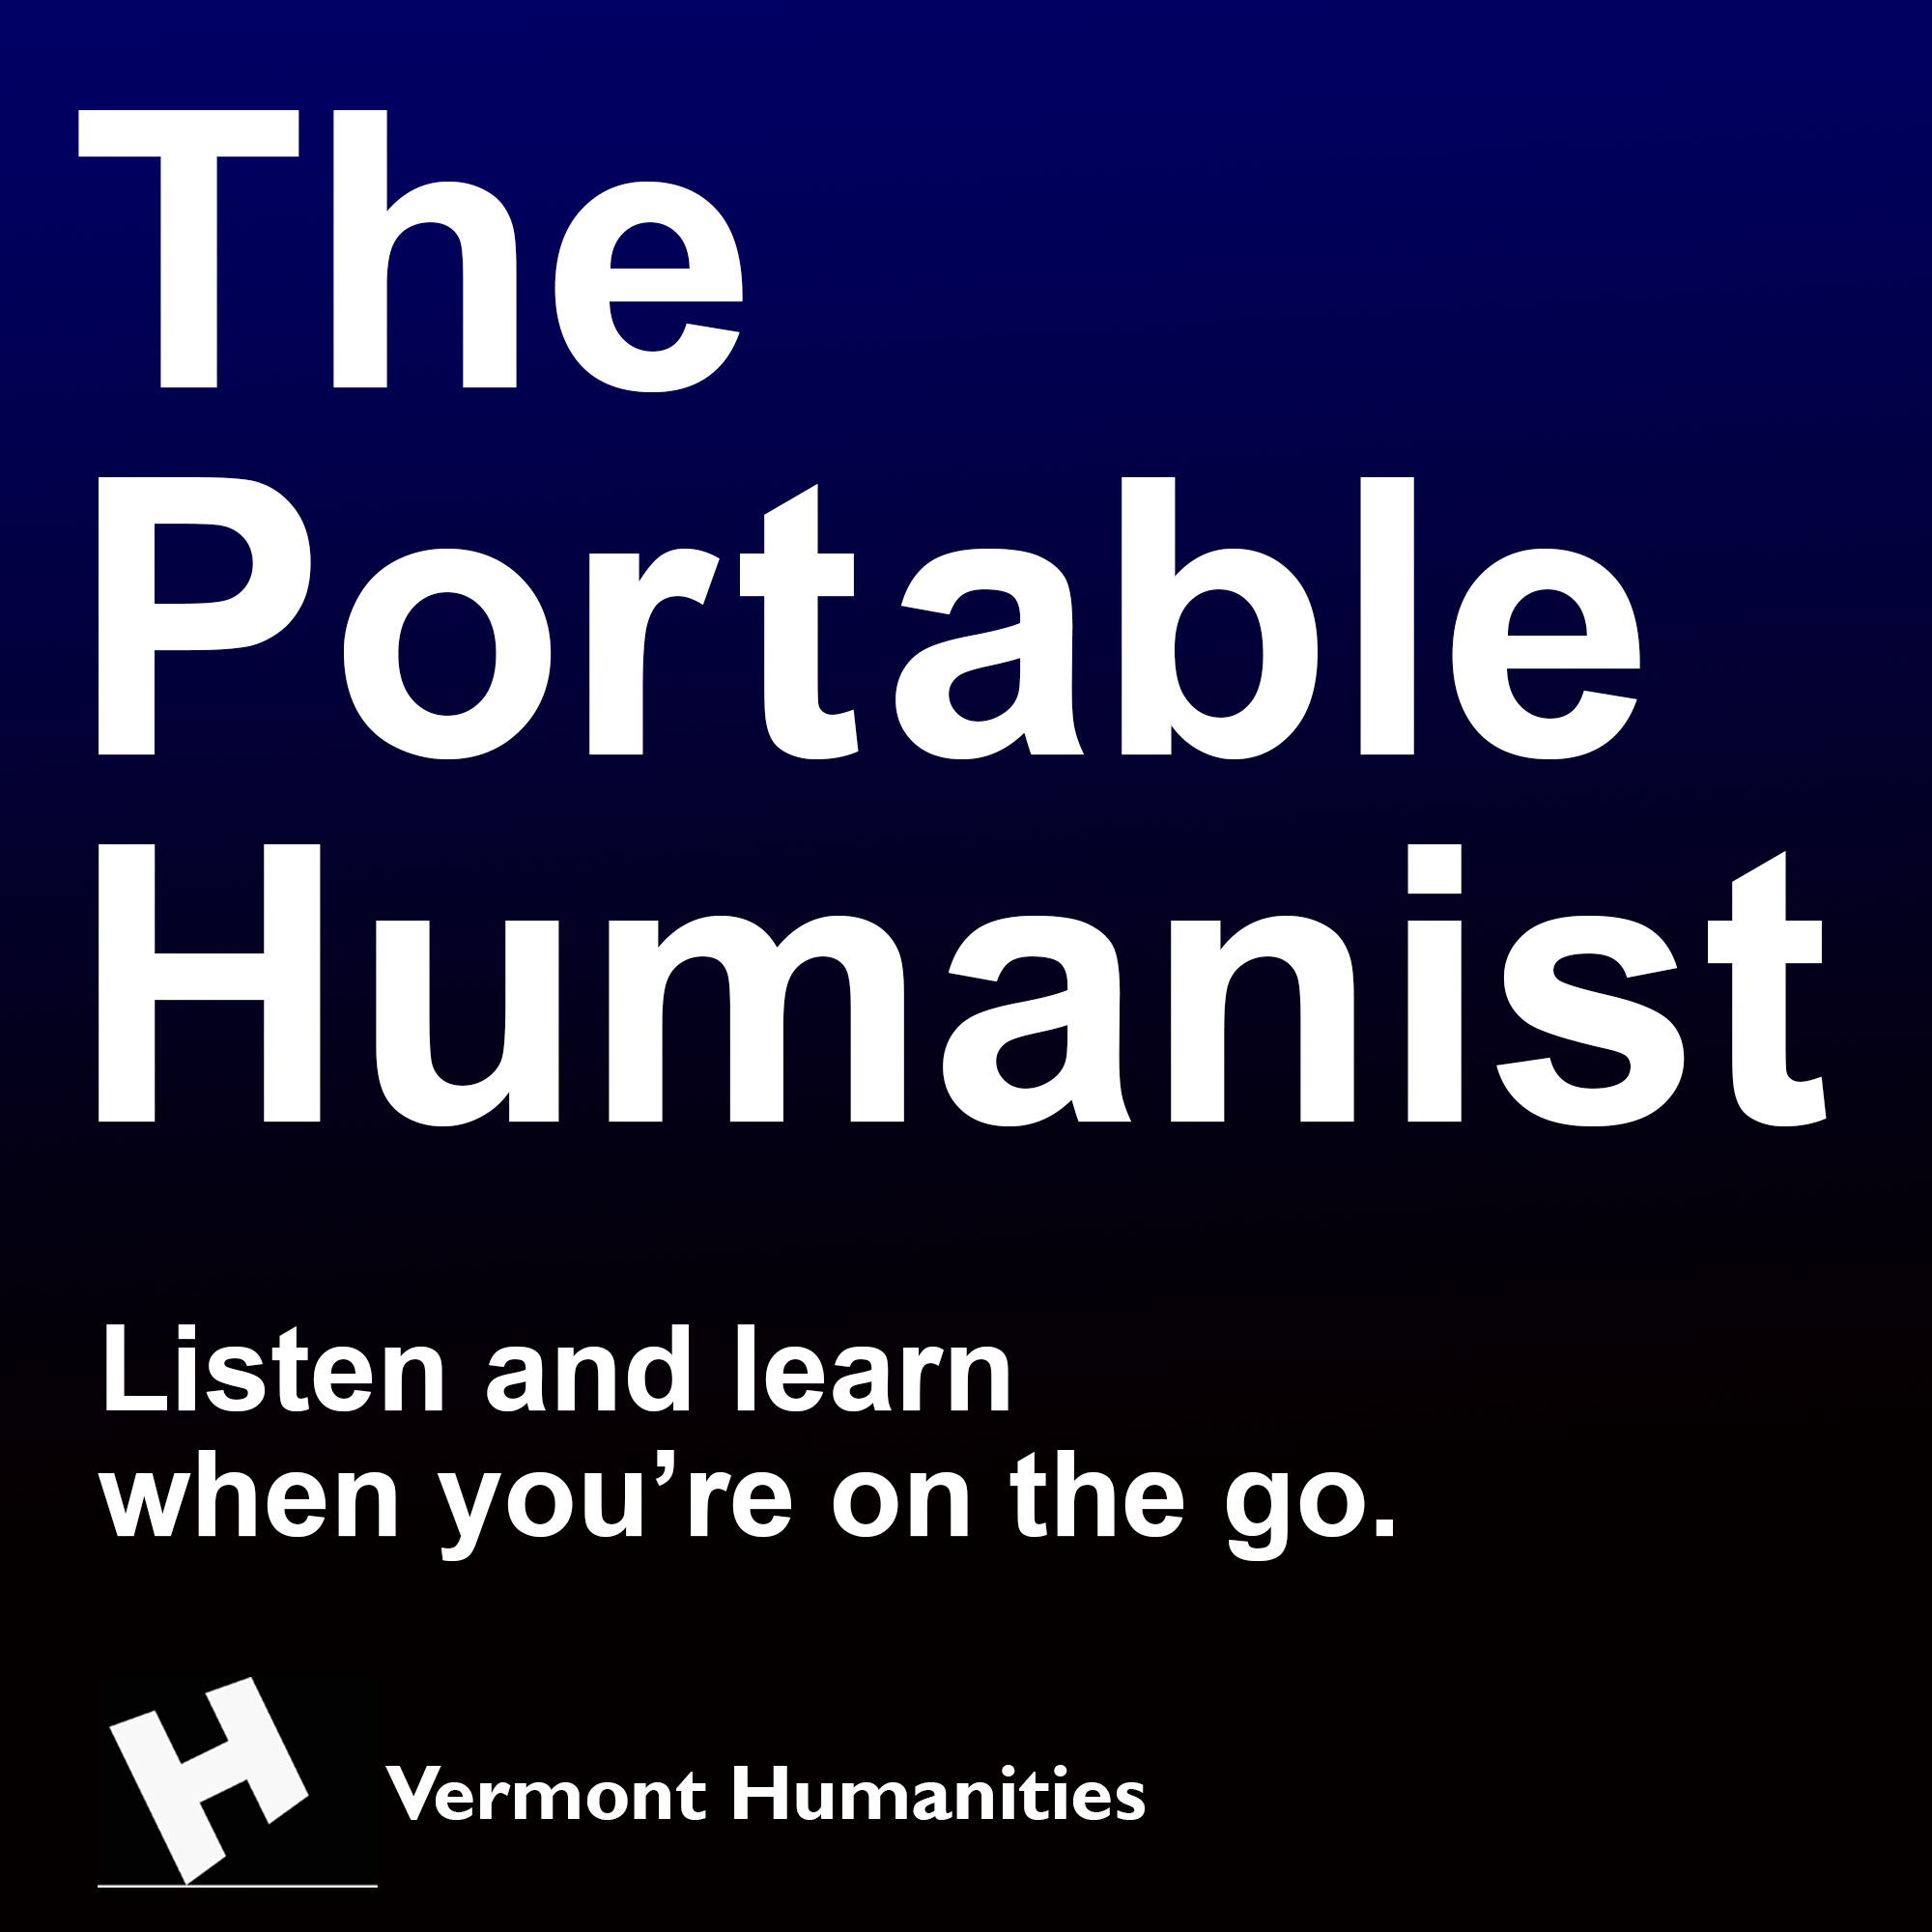 The Portable Humanist